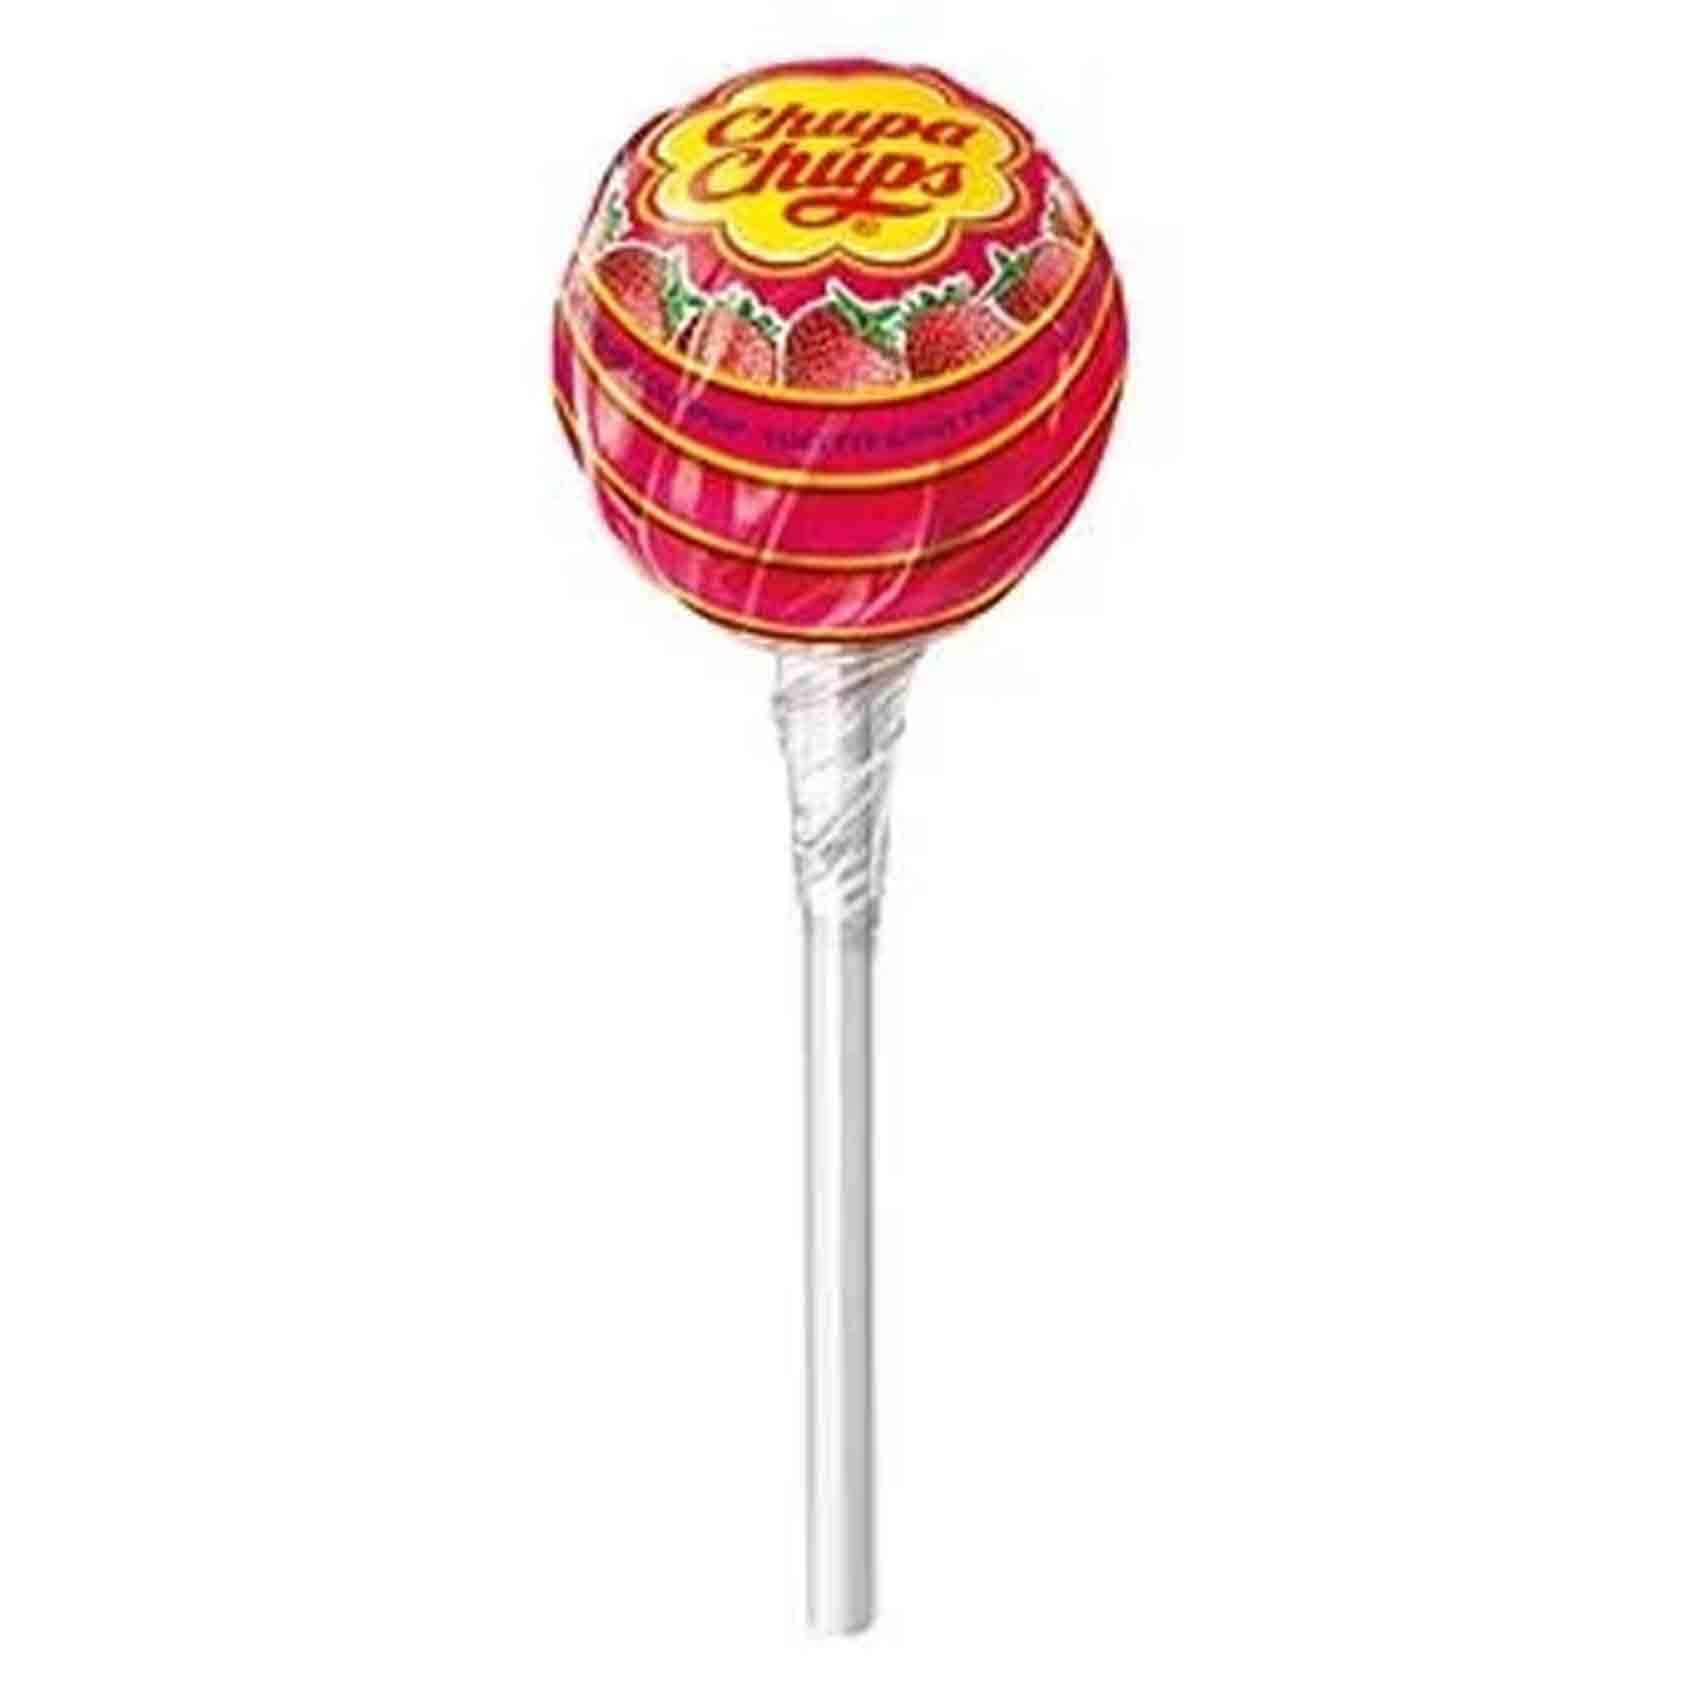 Buy Chupa Chups sugarfree lollipops with fruit flavours (strawberry, cherry  and cola) online at a great price